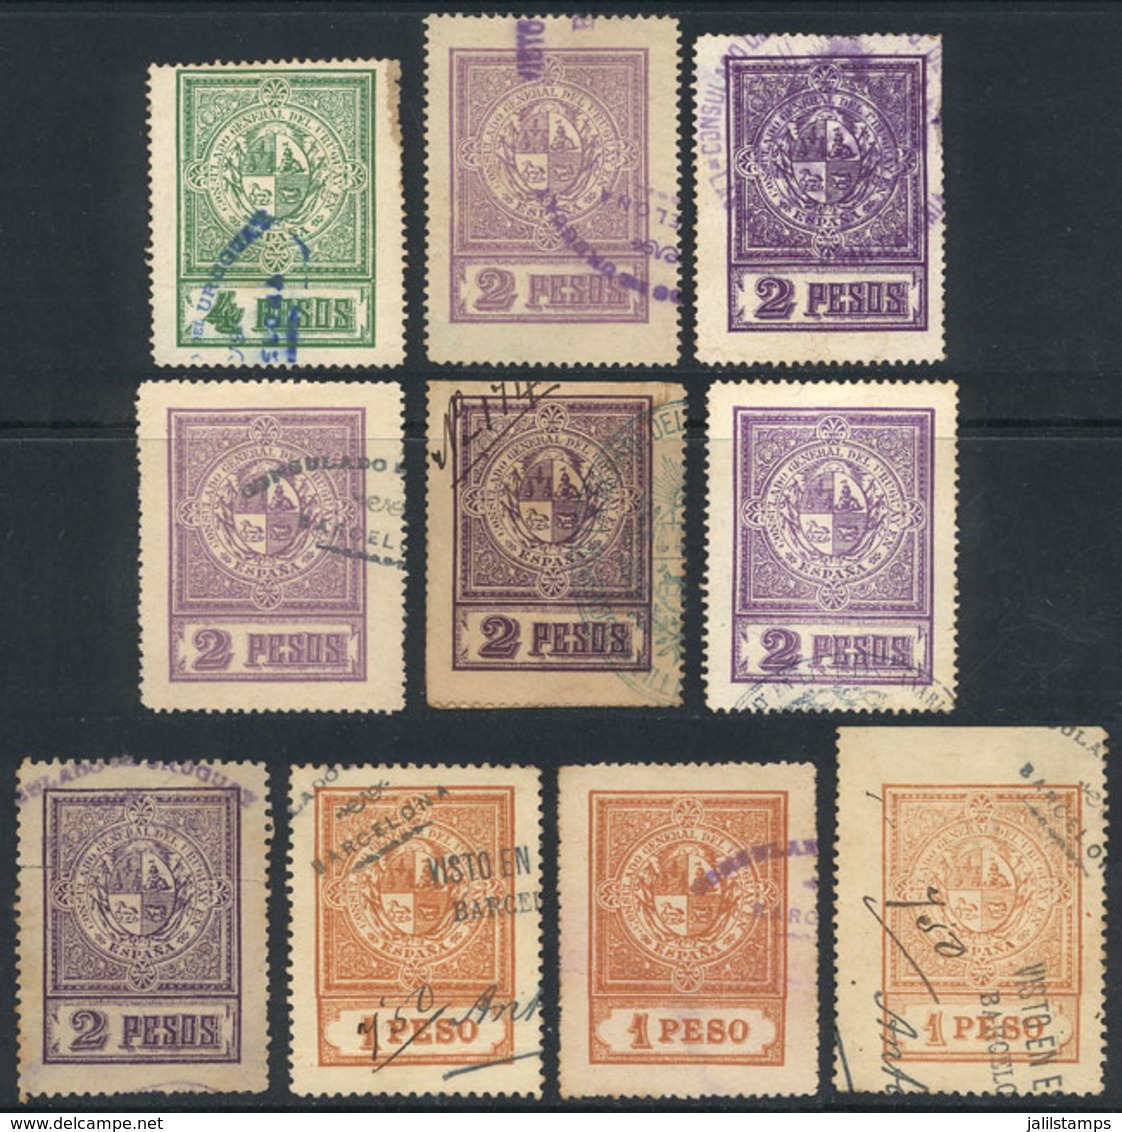 URUGUAY: CONSULATES IN SPAIN: 10 Old Stamps, Including Several Of 2P. Violet On Two Different Papers, Mixed Quality (fro - Uruguay